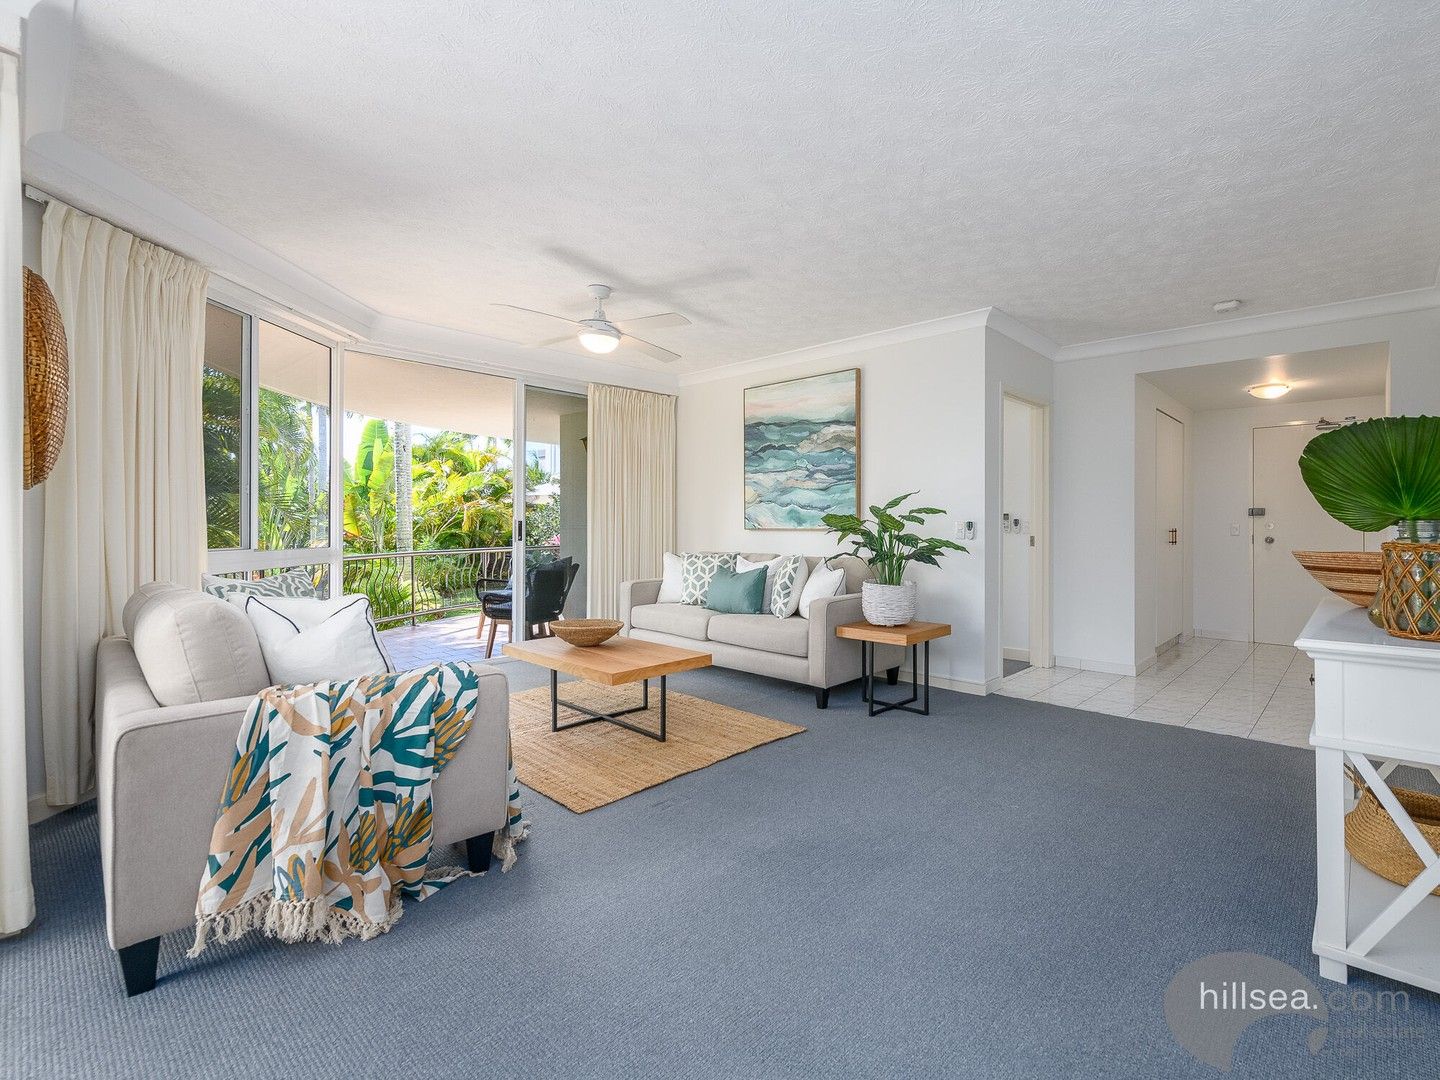 2 bedrooms Apartment / Unit / Flat in 1/41A Broadwater Street RUNAWAY BAY QLD, 4216